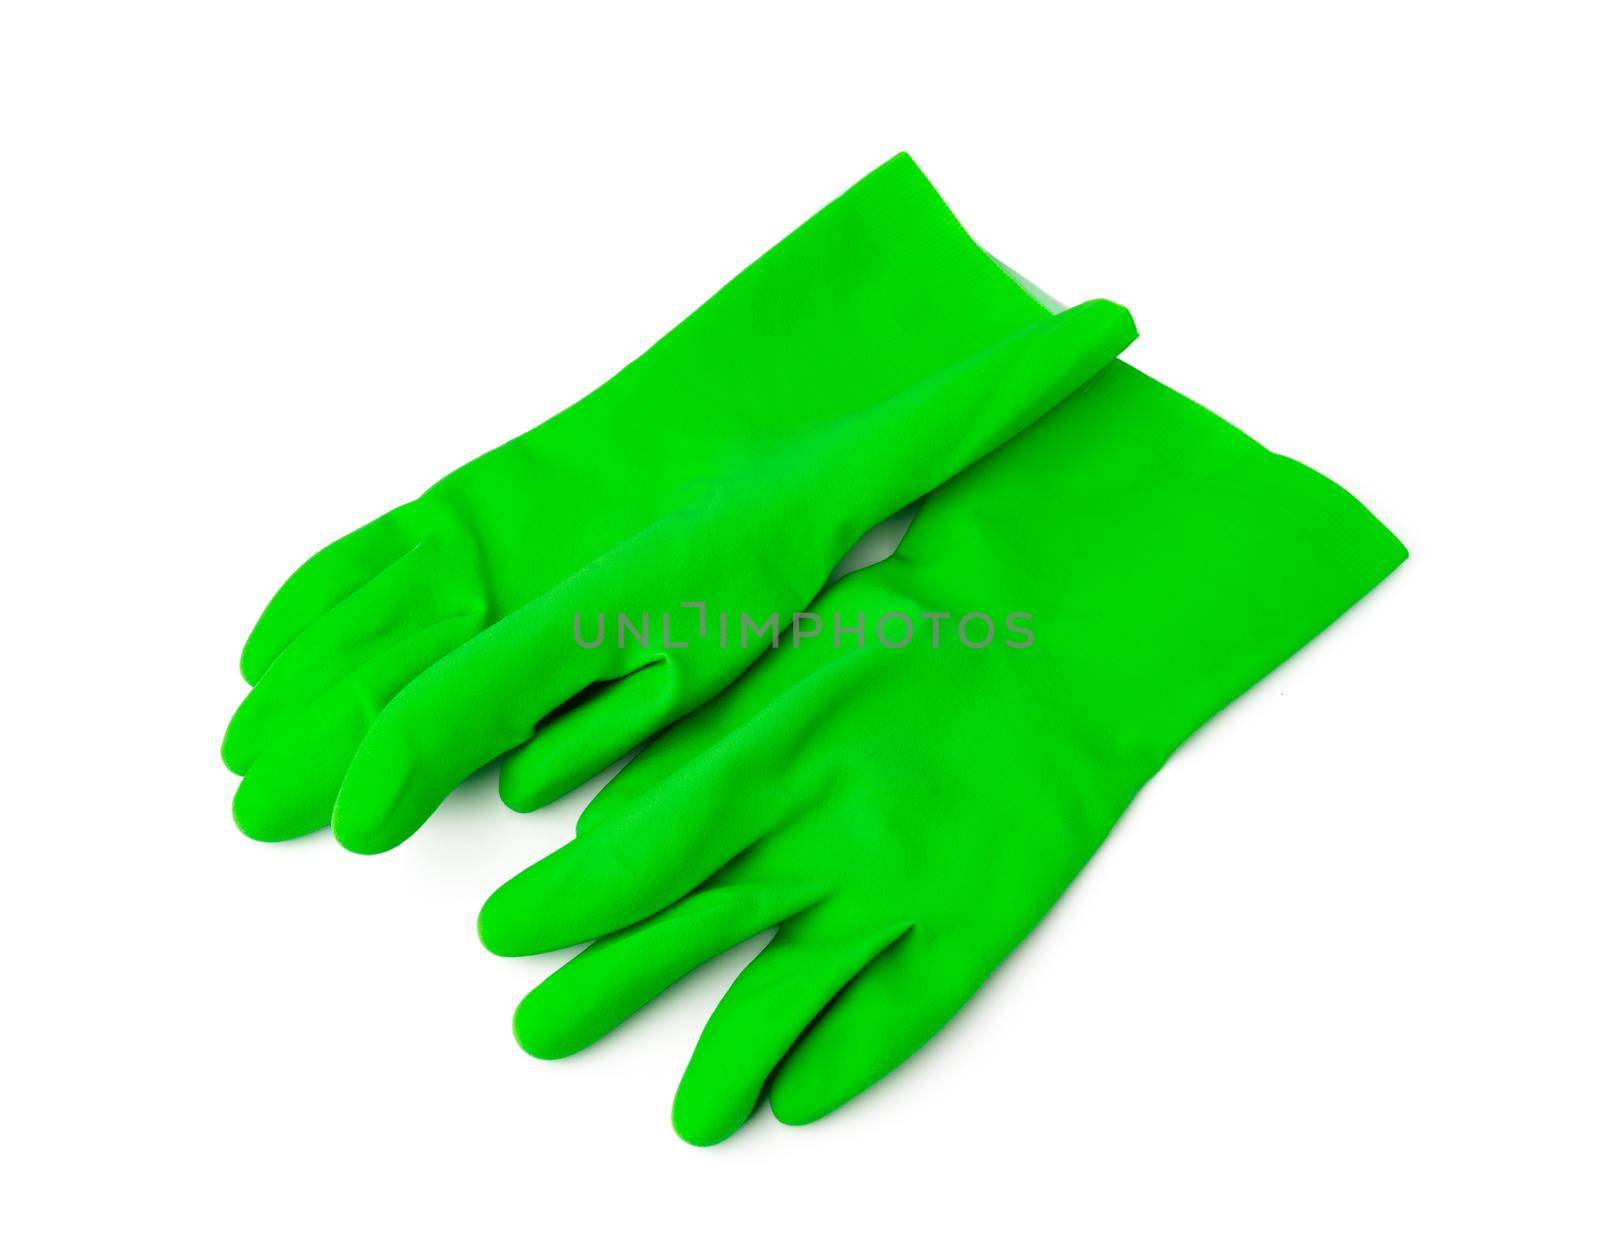 Latex protective gloves isolated on white background, close up